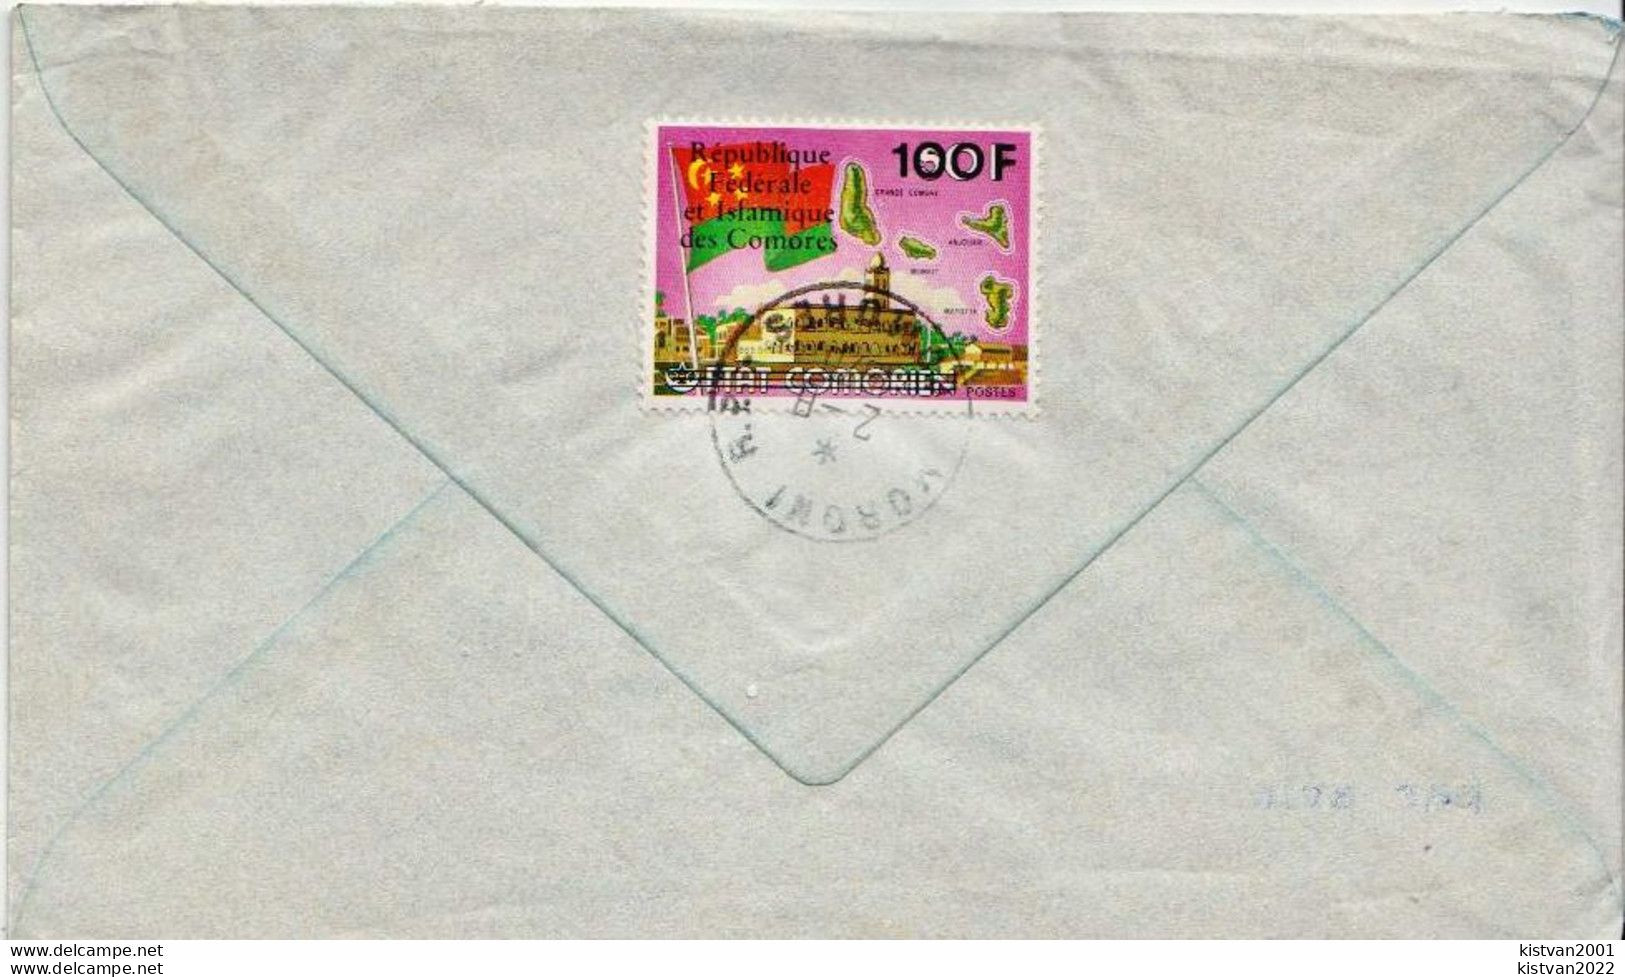 Comores Registered Cover With Overprinted Voyager Set From1978, Very Rare Postal History Cover!!!!! - Africa